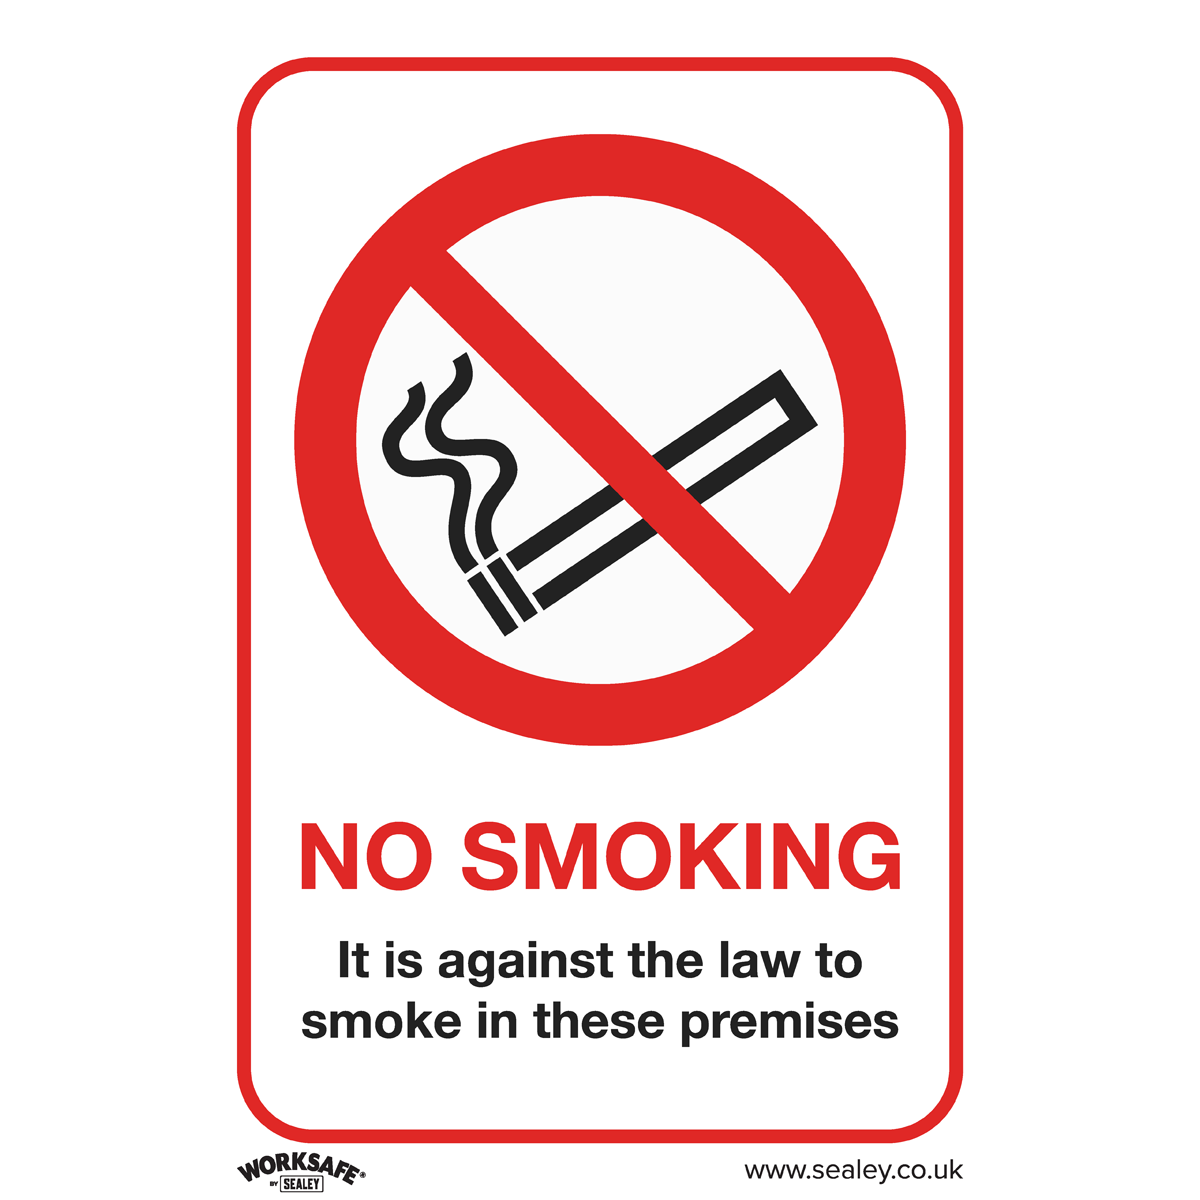 Sealey Prohibition Safety Sign - No Smoking (On Premises) - Self-Adhesive Vinyl - Pack of 10